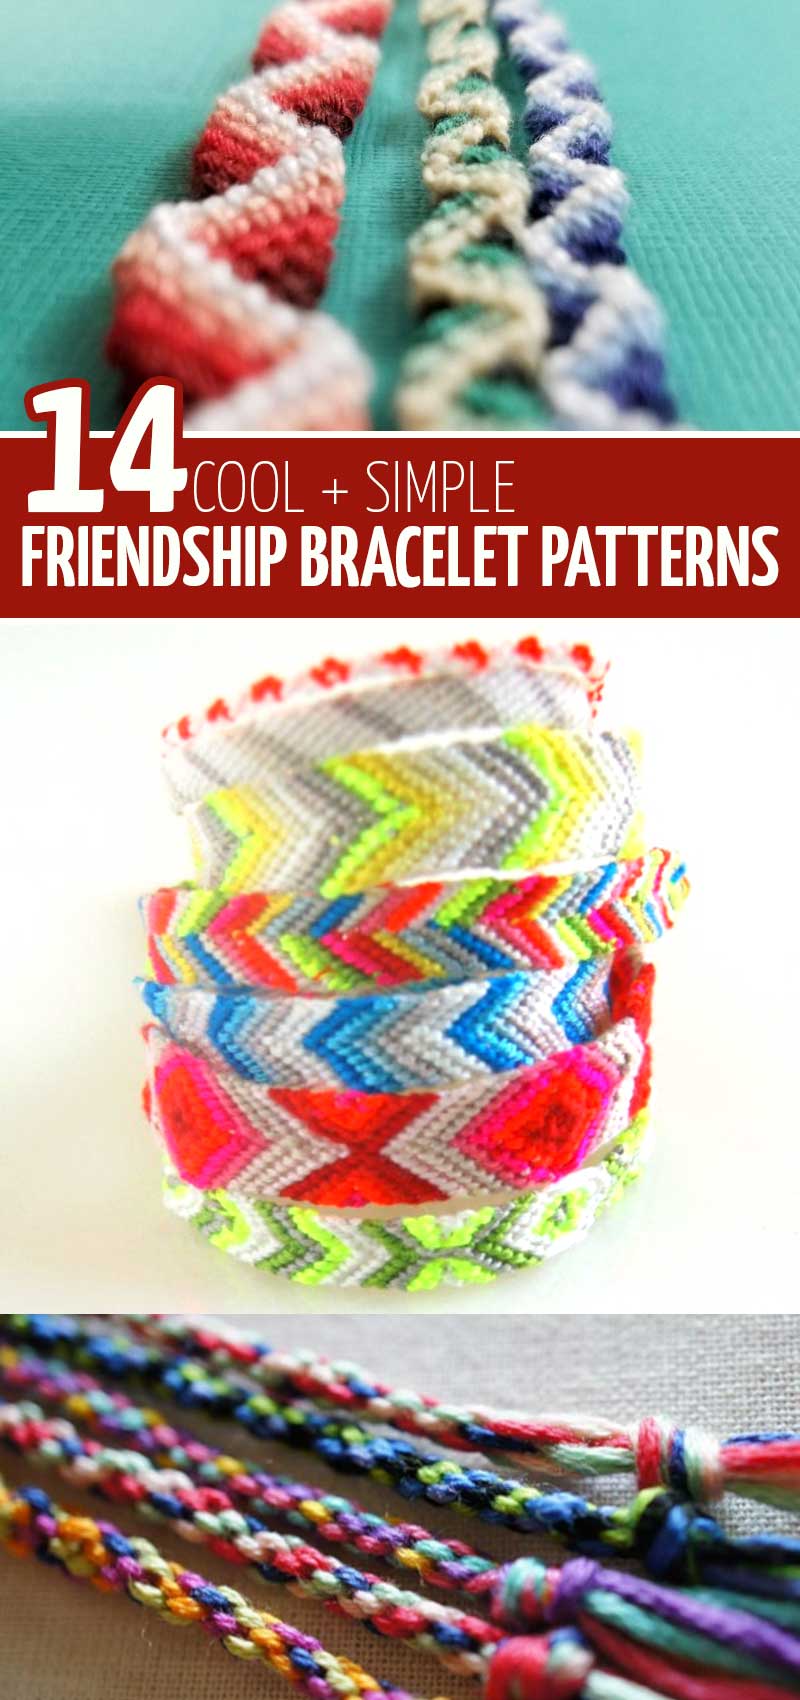 How to Make Friendship Bracelets out of String  Diy bracelets with string,  Friendship bracelets with beads, Braided friendship bracelets